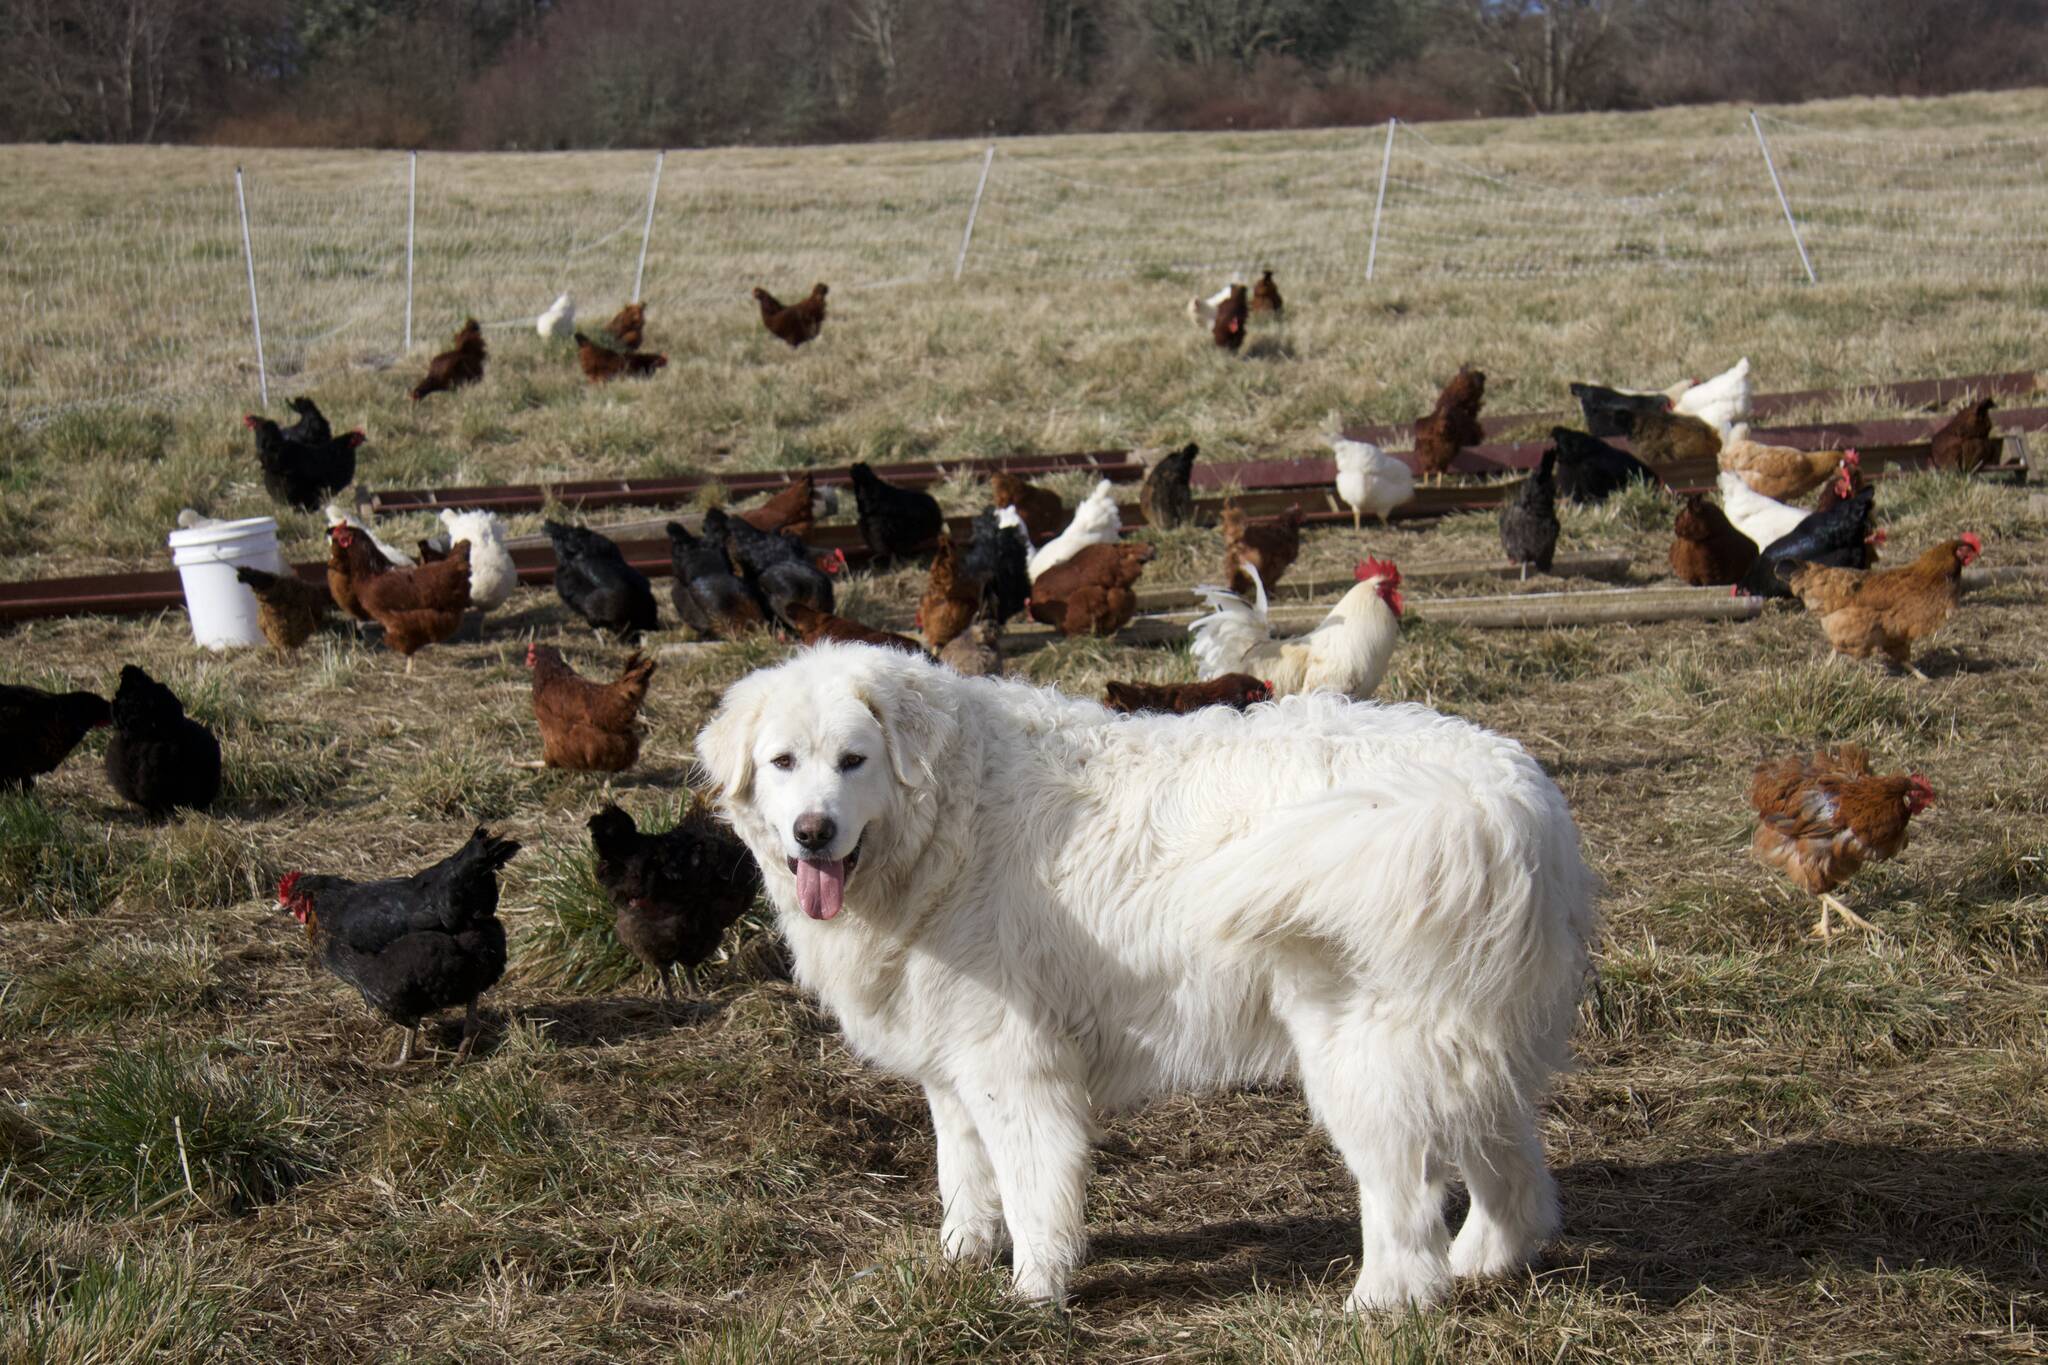 Photos by Rachel Rosen/Whidbey News-Times
1902 Ranch in Coupeville has three livestock guardian dogs to protect its chickens.